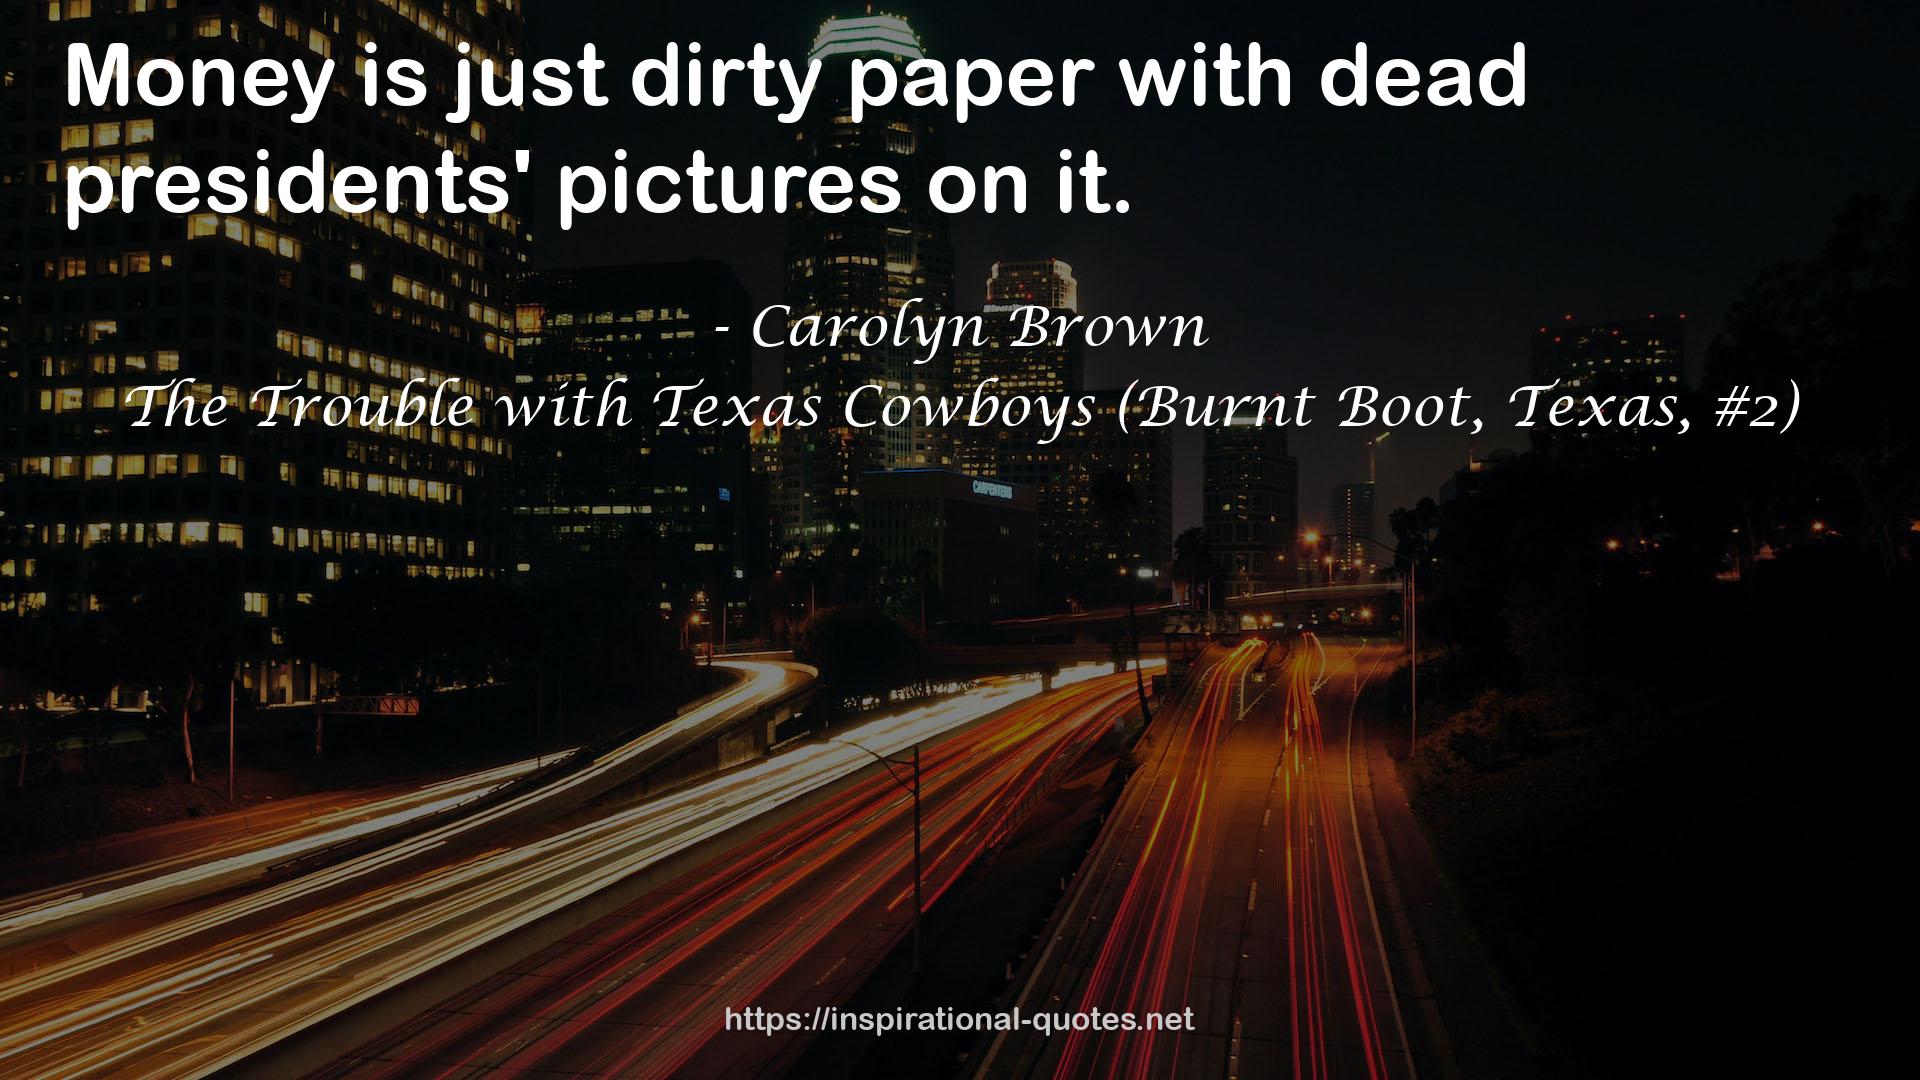 The Trouble with Texas Cowboys (Burnt Boot, Texas, #2) QUOTES